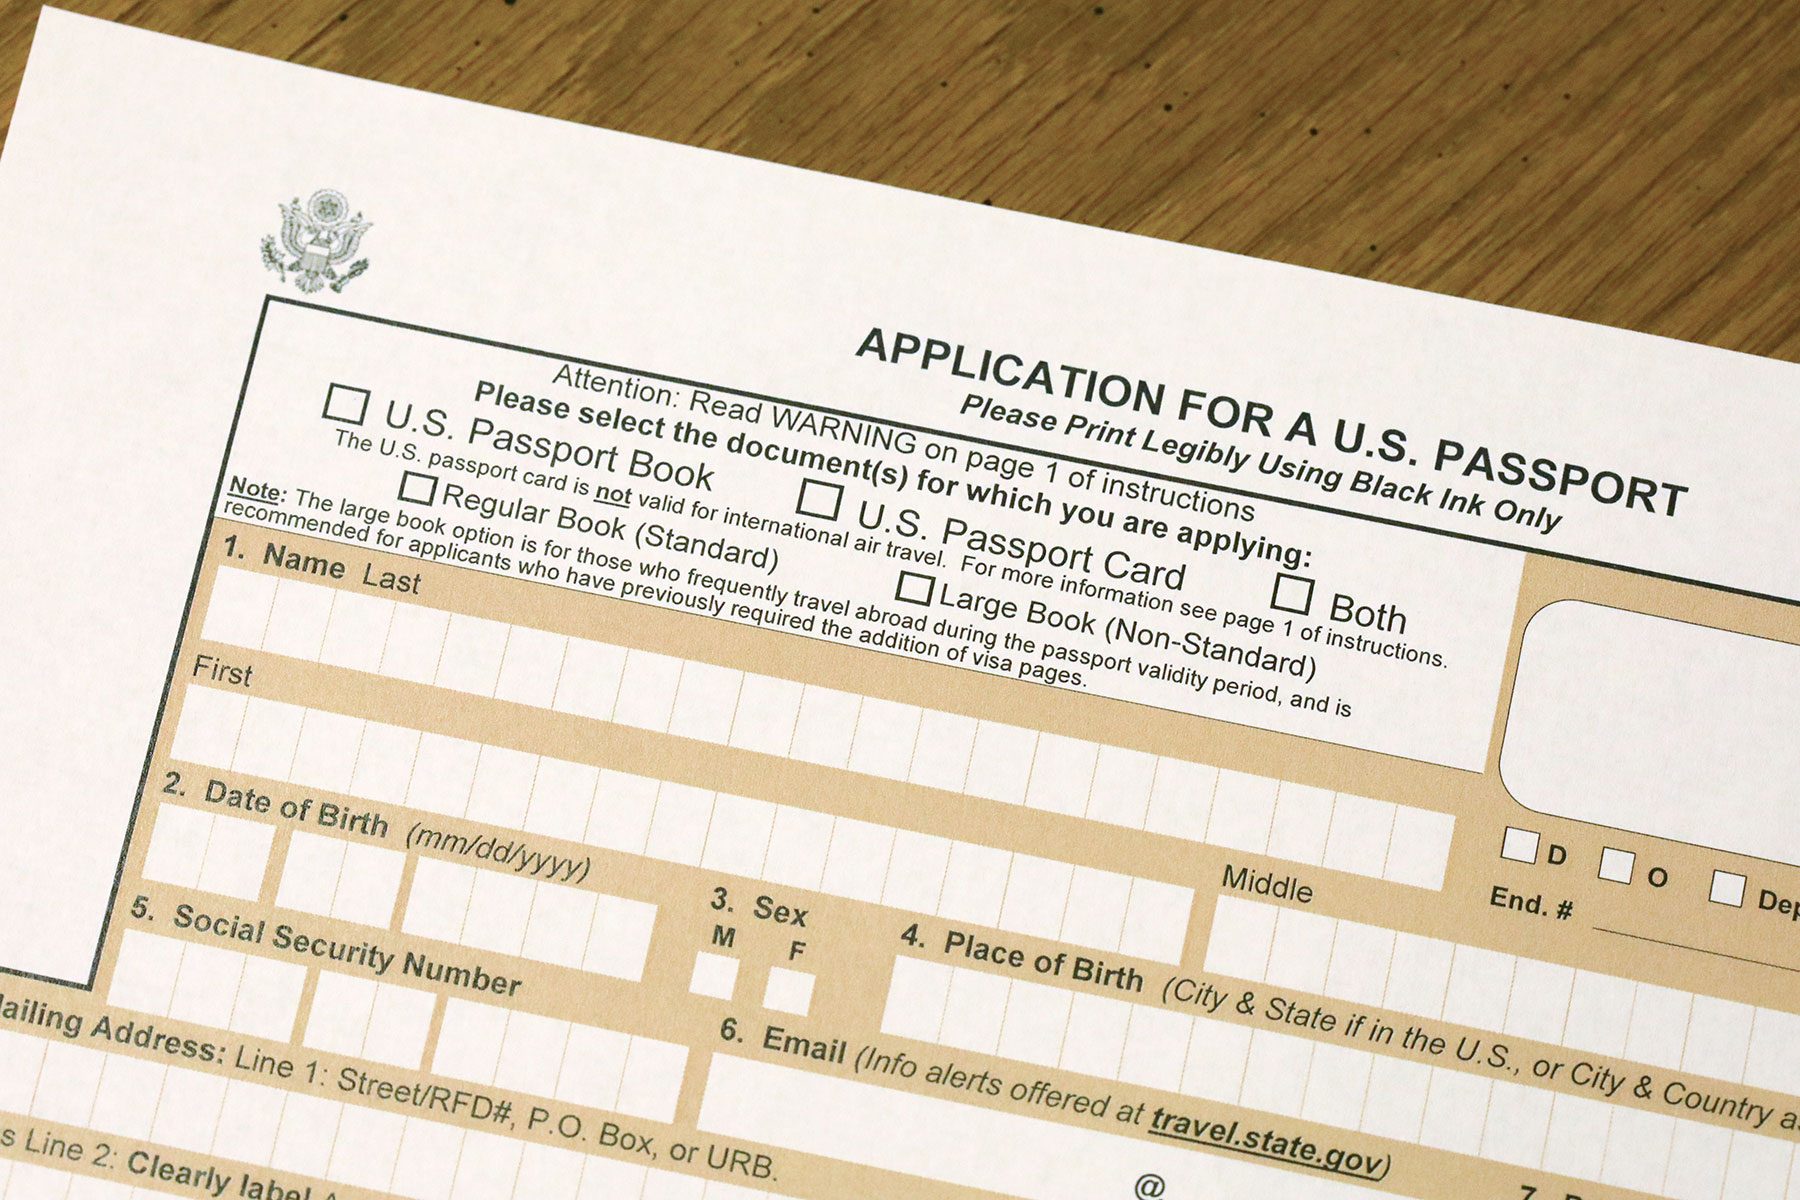 Government Passport Application From The U.s. Department Of State